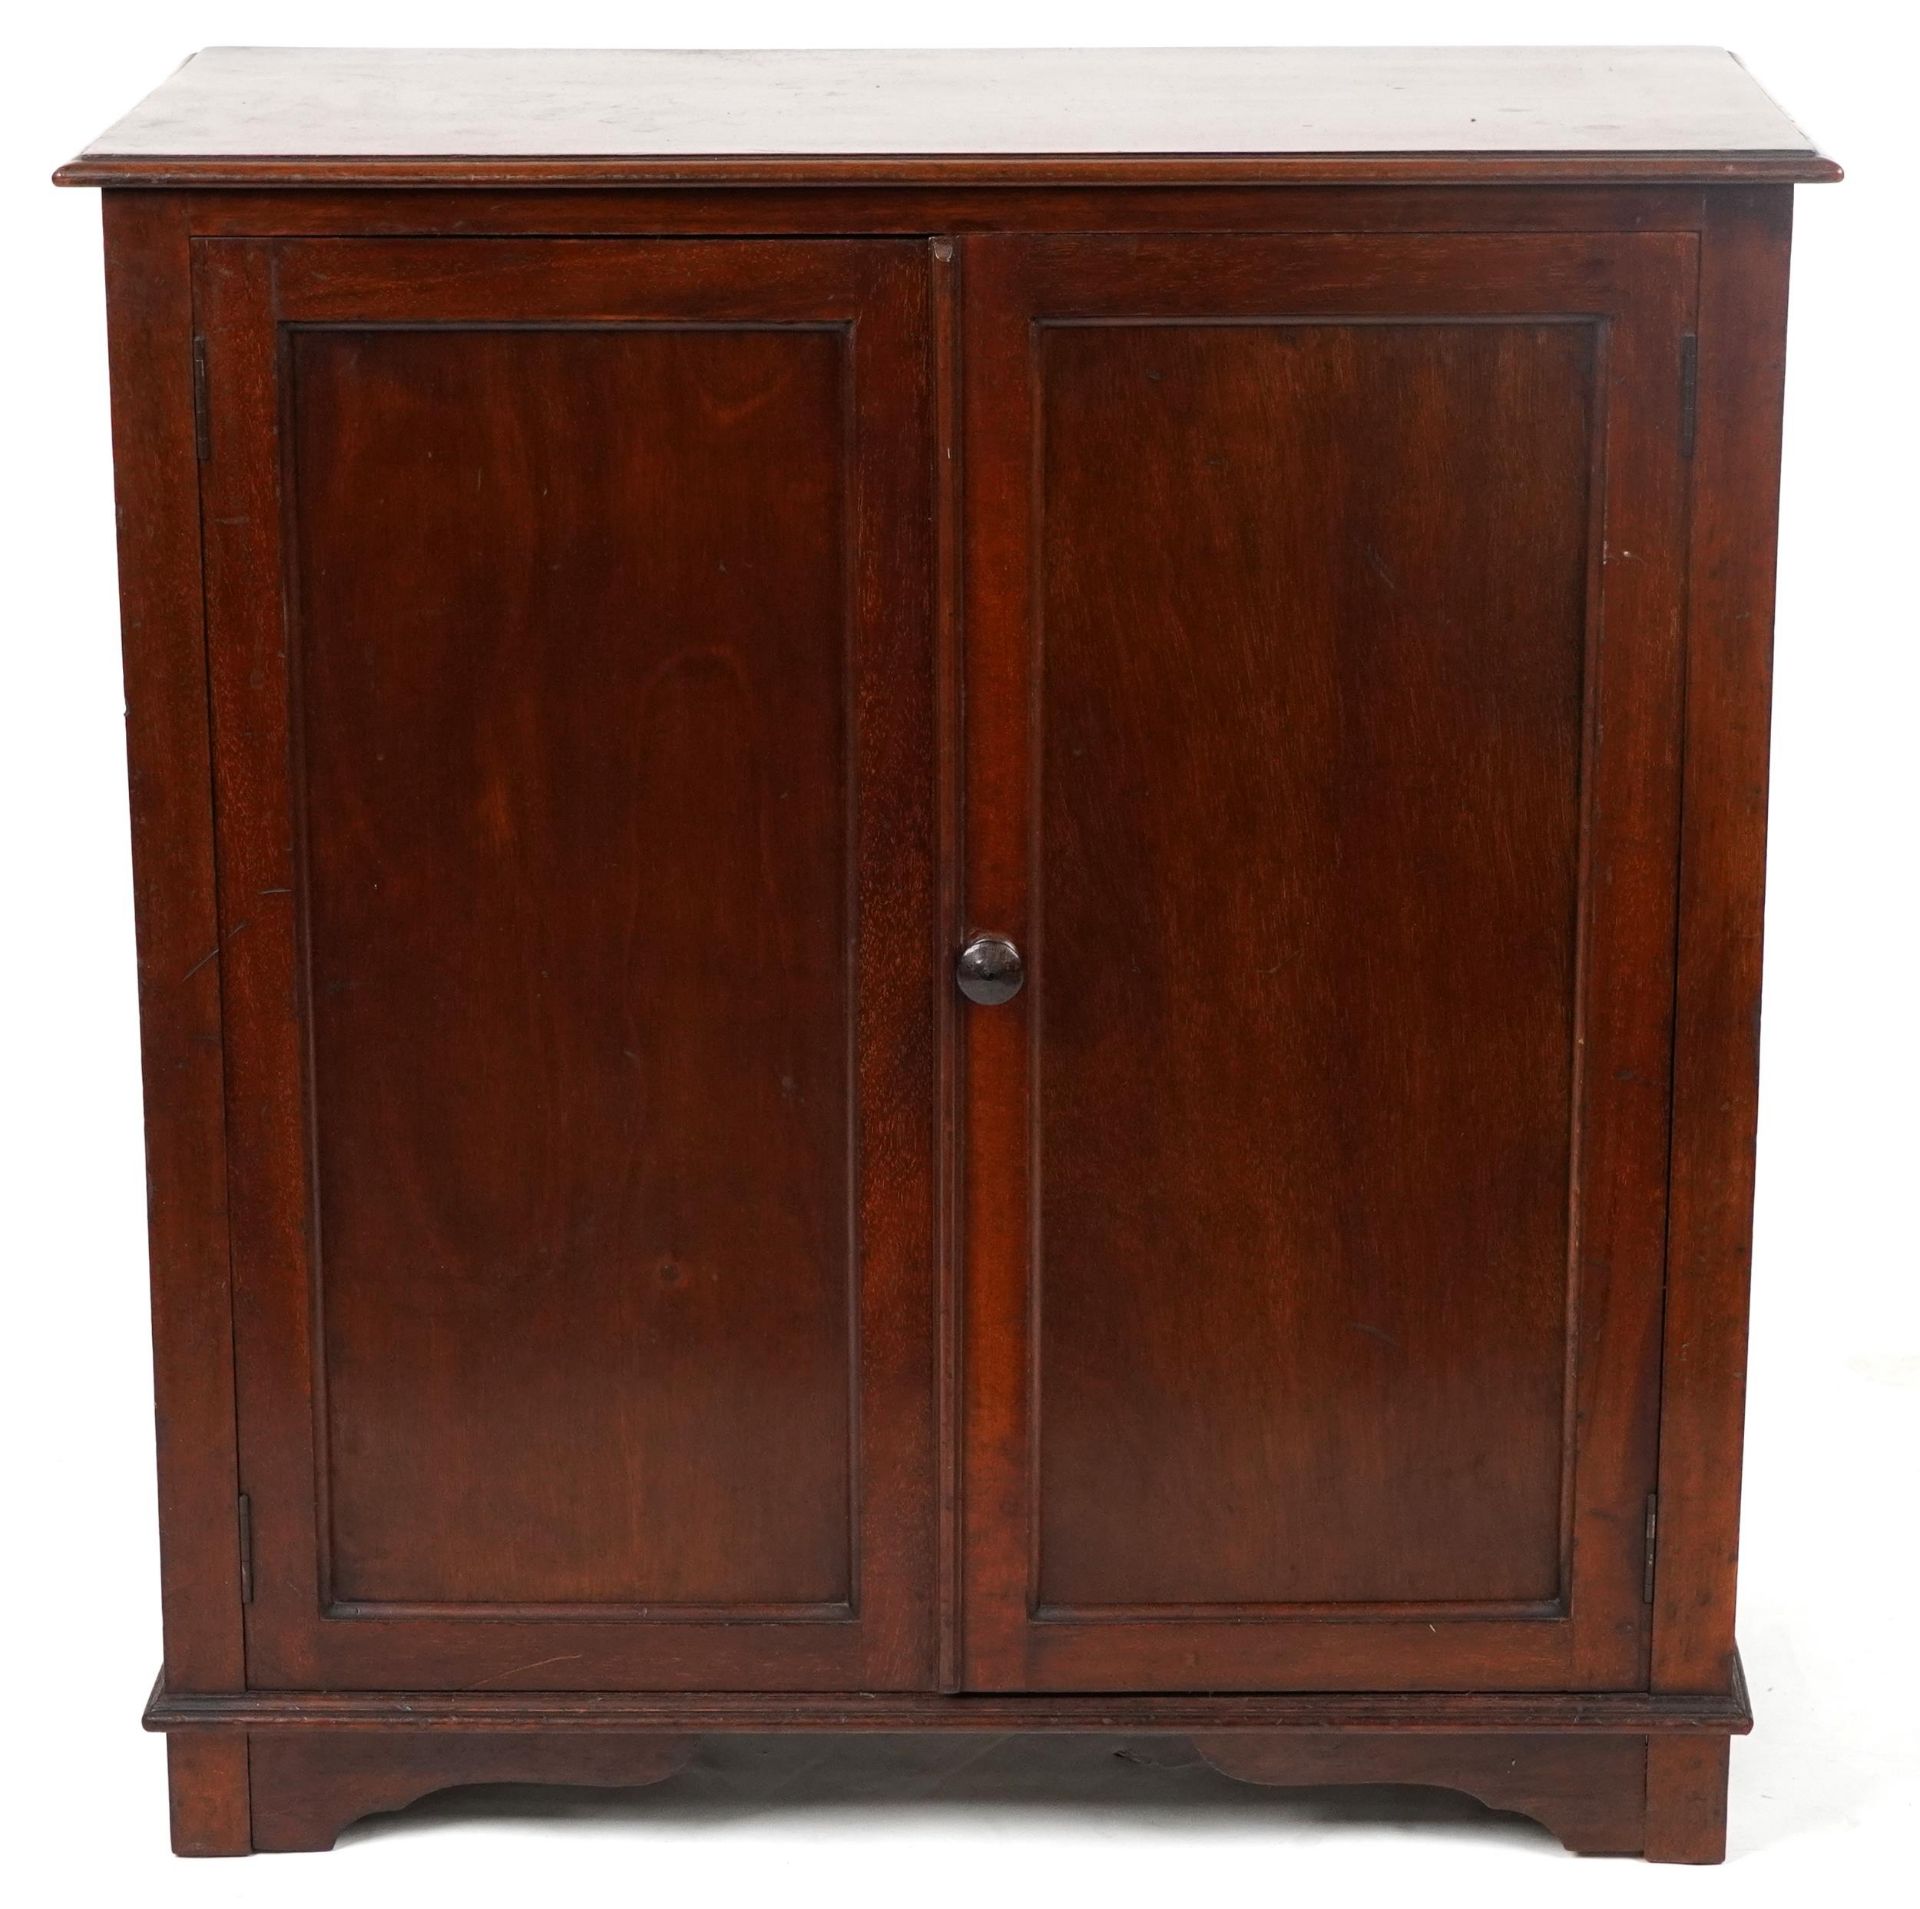 Aw-Lyn, mahogany two door cupboard enclosing three shelves, 78cm H x 75cm W x 36cm D : For further - Image 2 of 6